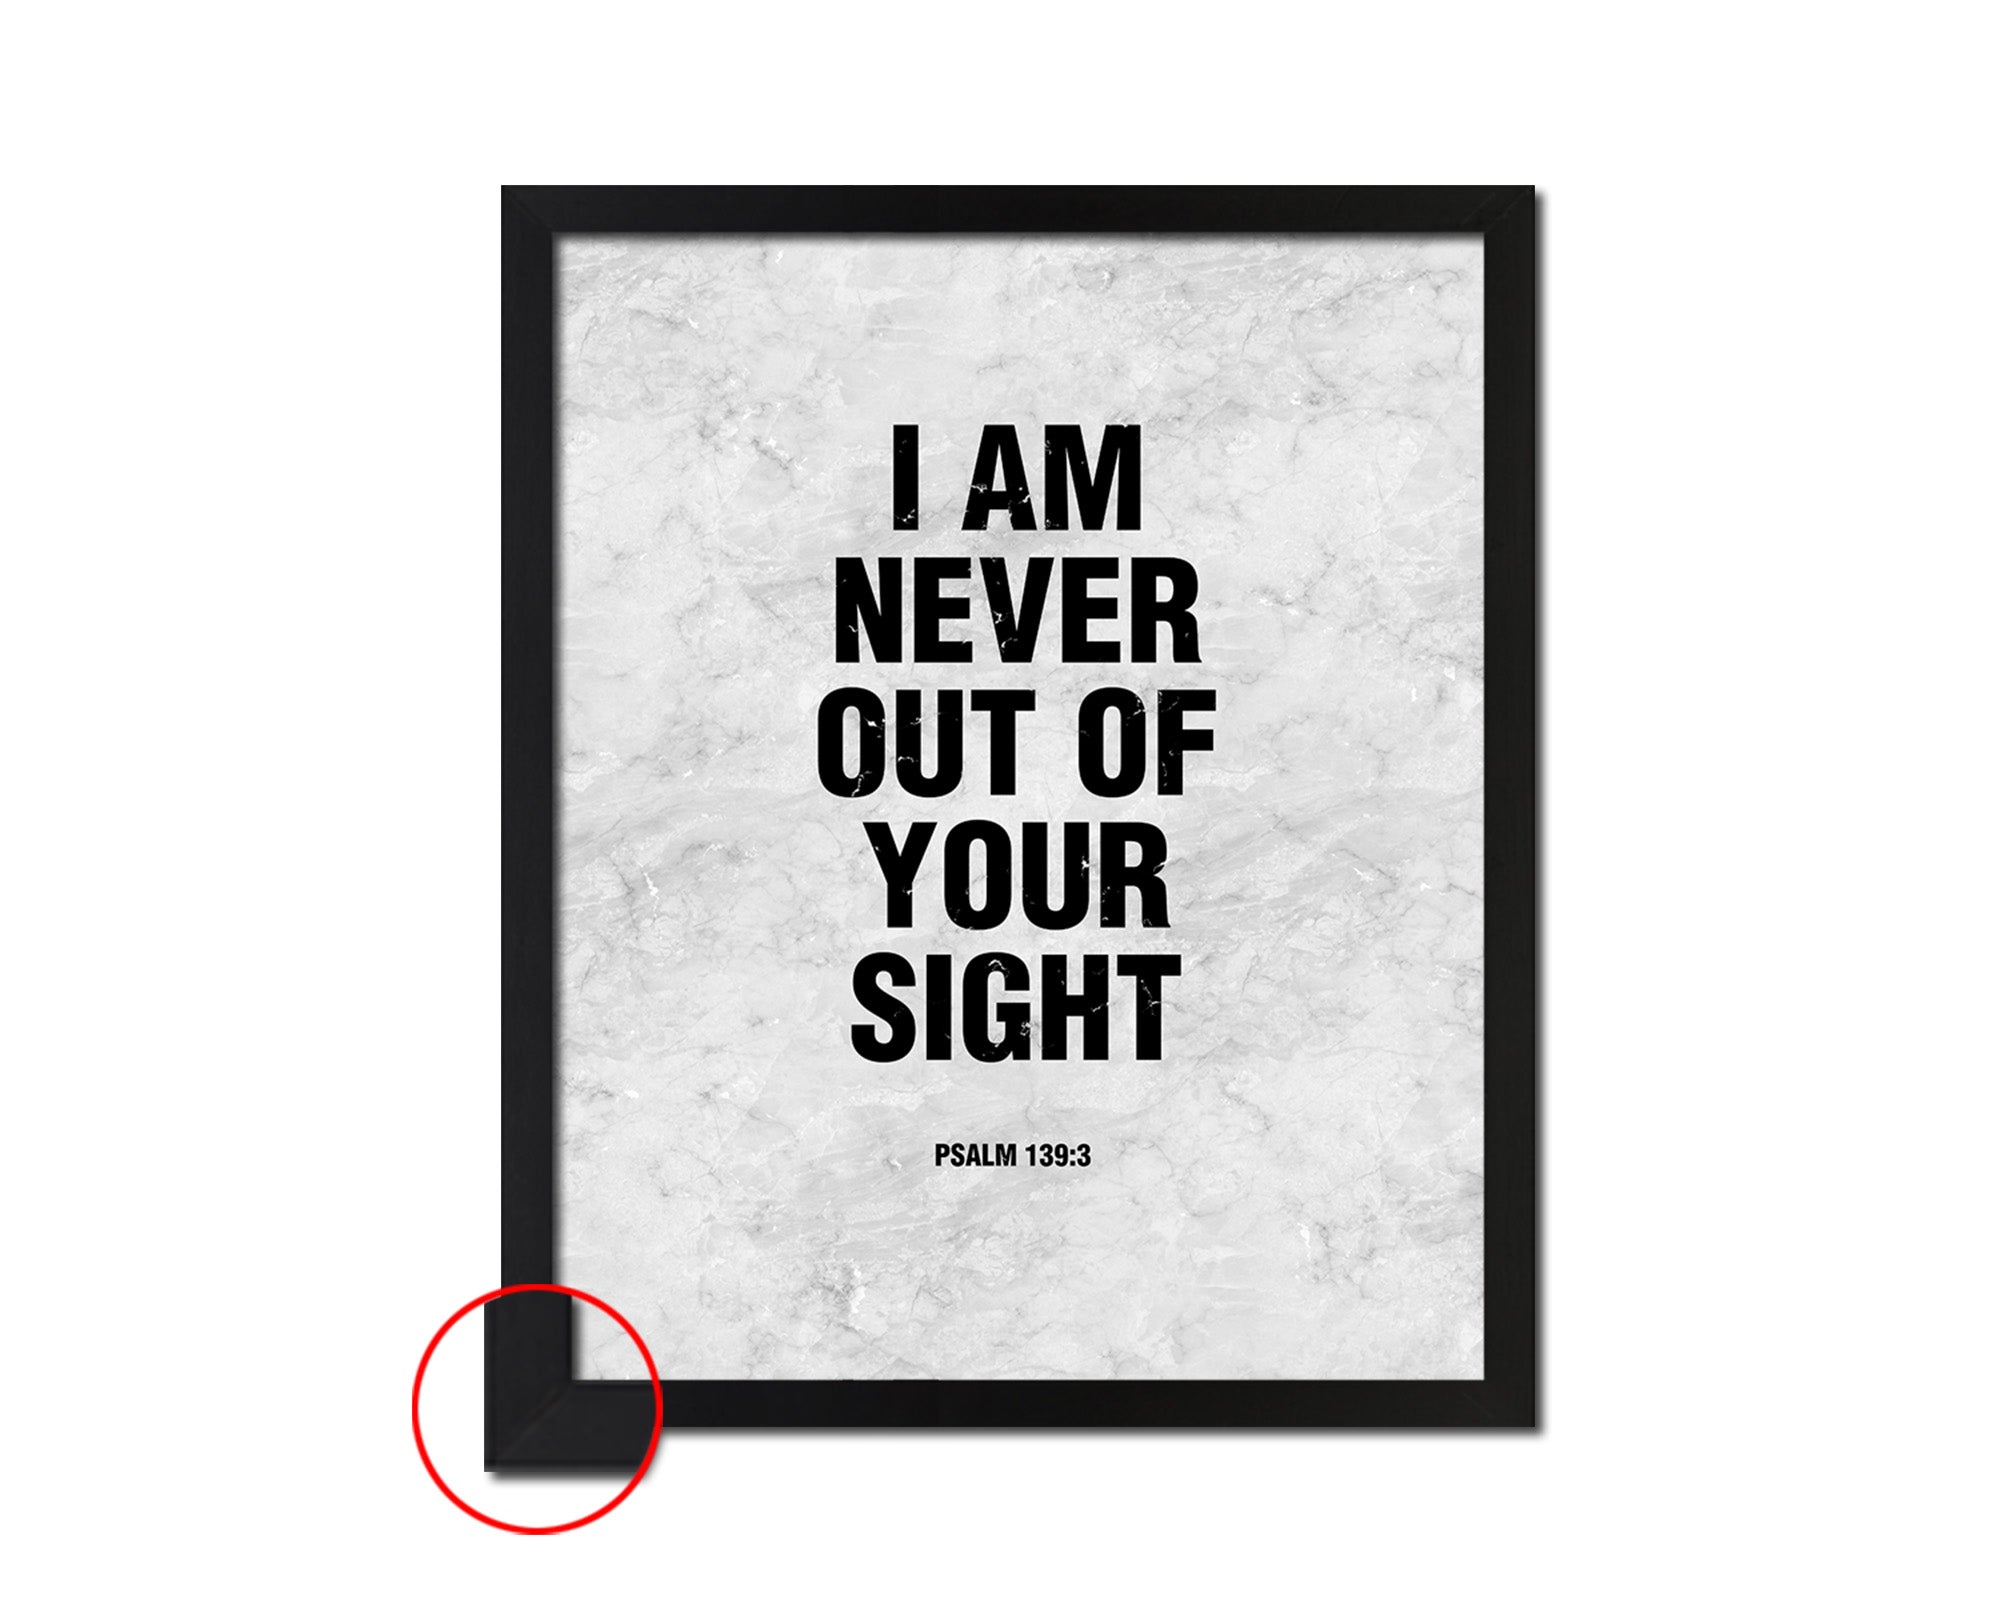 I am never out of your sight, Psalm 139:3 Bible Scripture Verse Framed Print Wall Art Decor Gifts